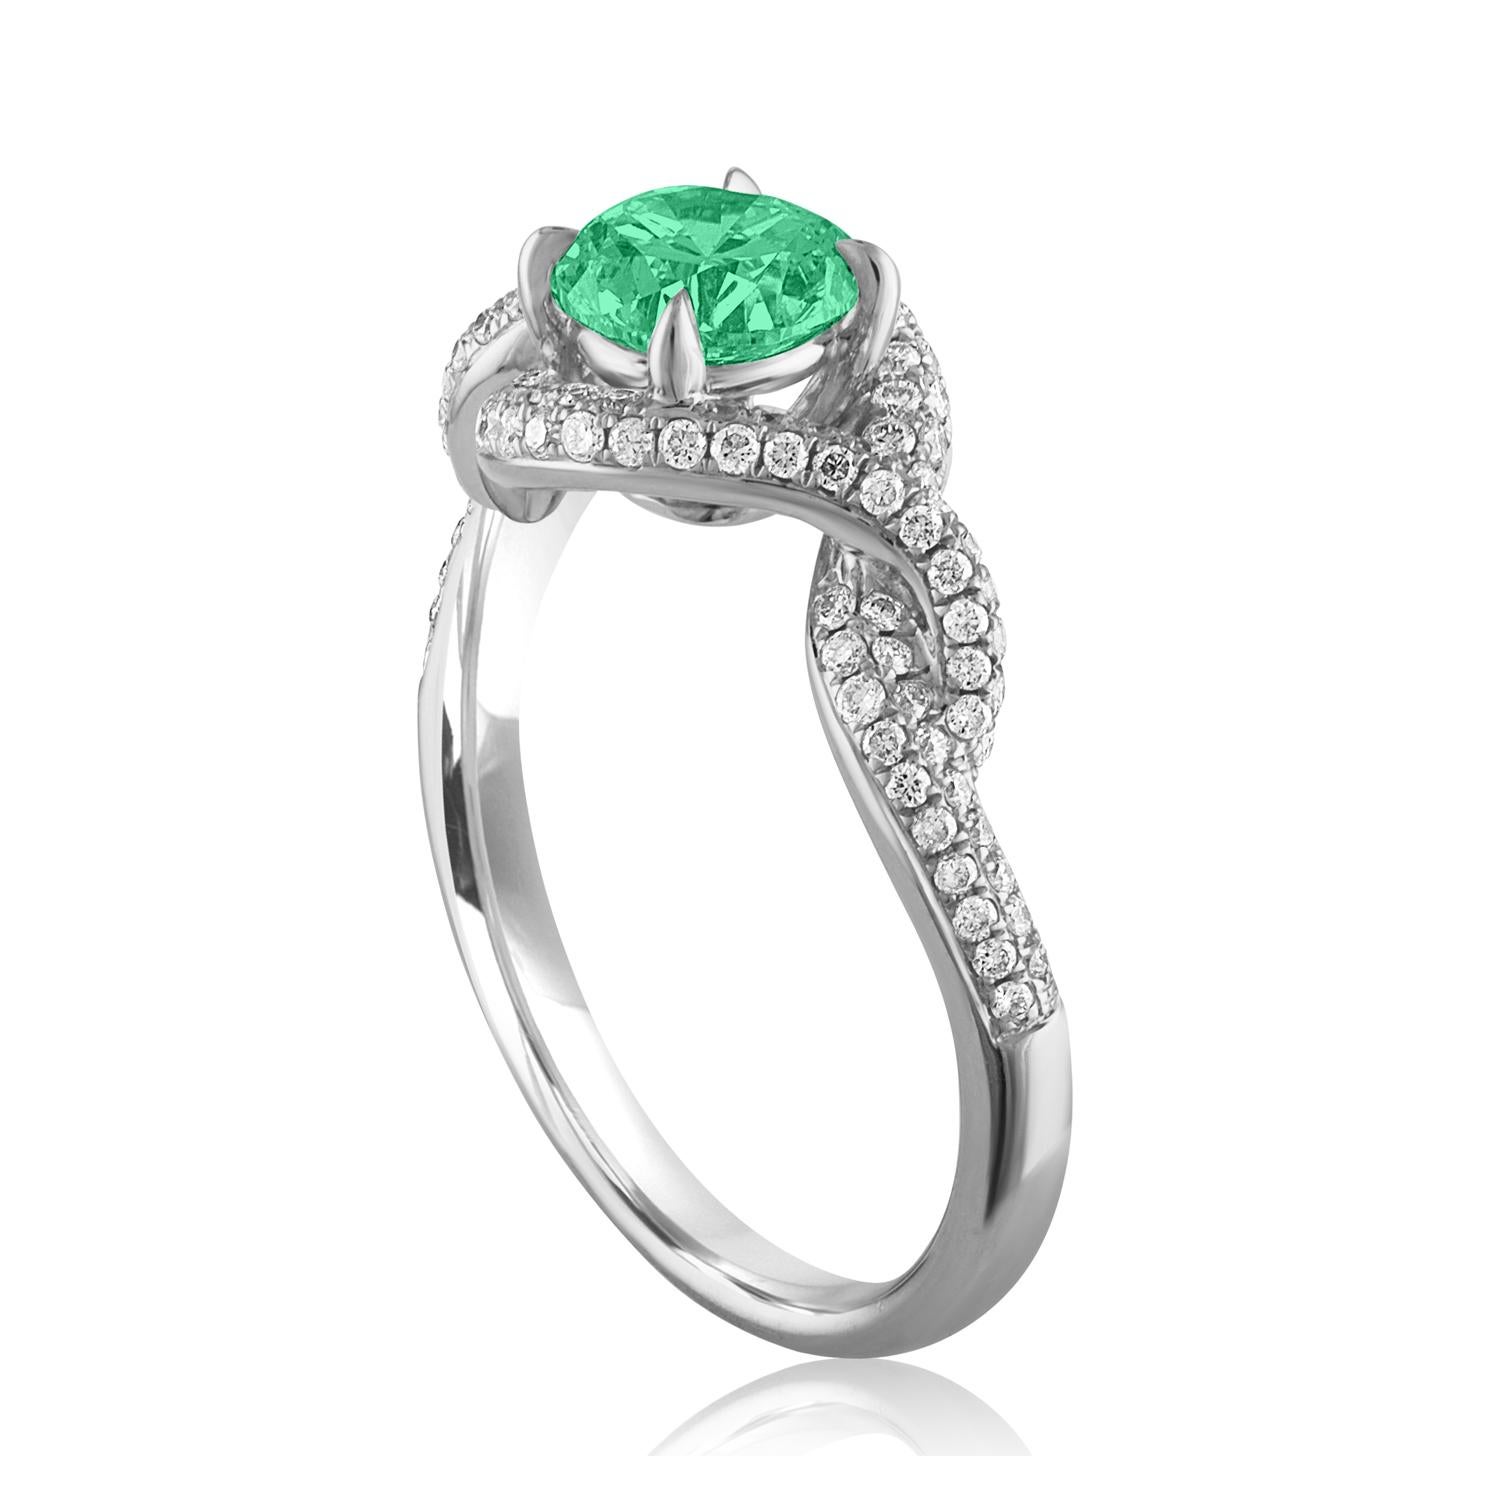 Beautiful Twist Shank Emerald Ring
The ring is 18K White Gold.
There are 0.40 Carats in Diamonds F/G VS/SI
The Center is Round 0.67 Carat Emerald.
The Emerald is AGL certified.
The ring is a size 6.75, sizable.
The ring weighs 3.8 grams.